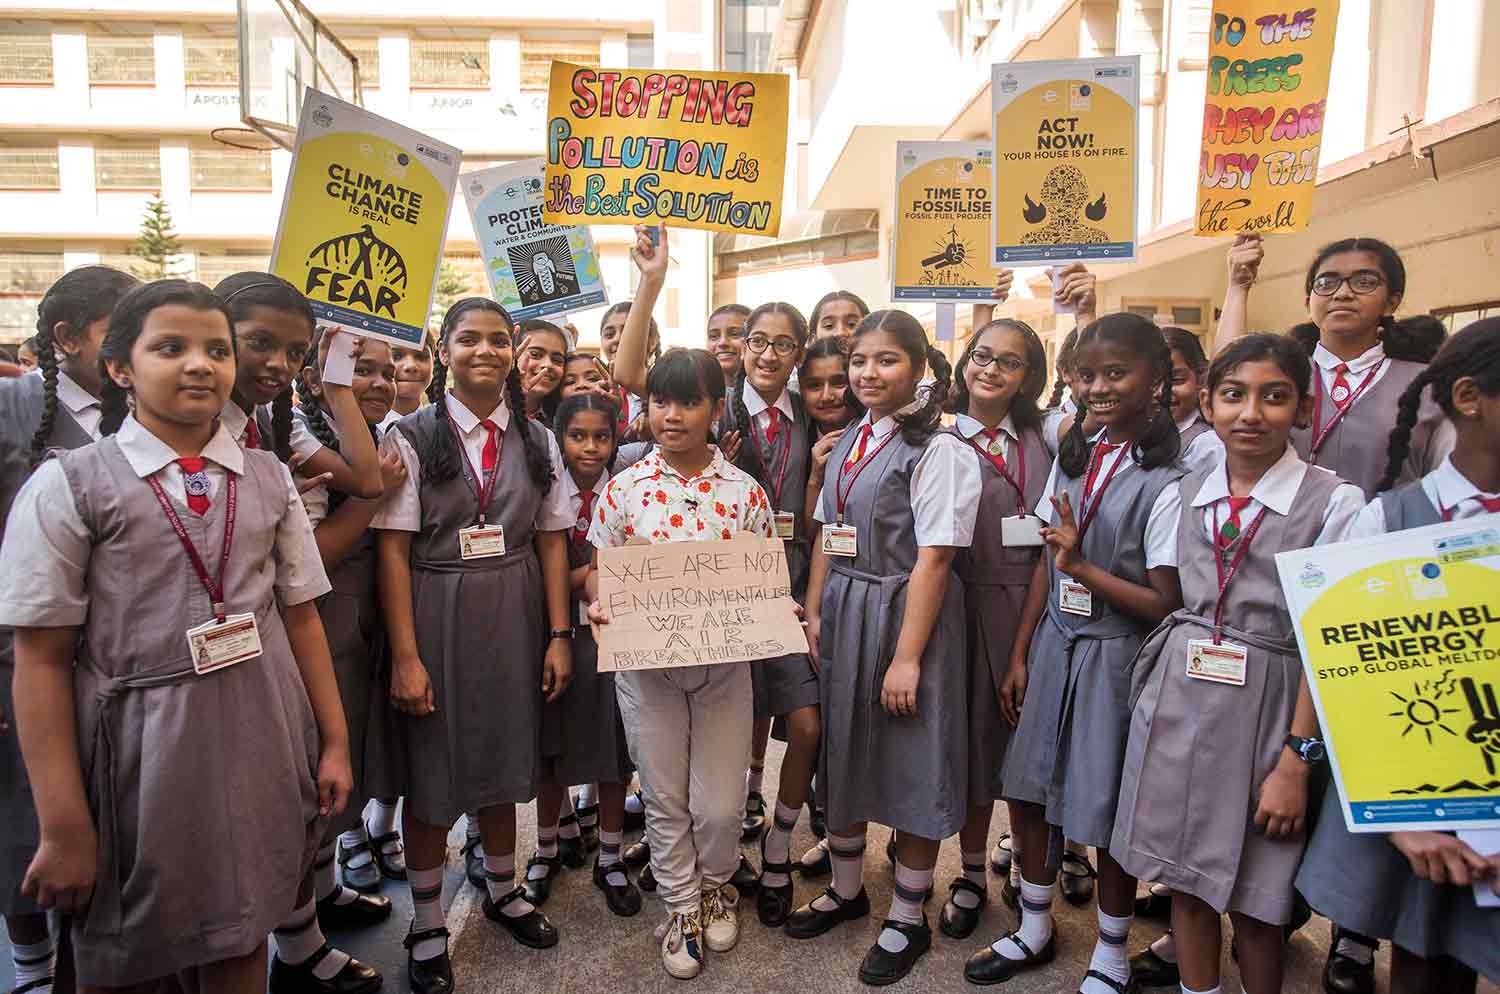 A young girl is surrounded by girls in school uniforms holding up signs supporting climate justice.